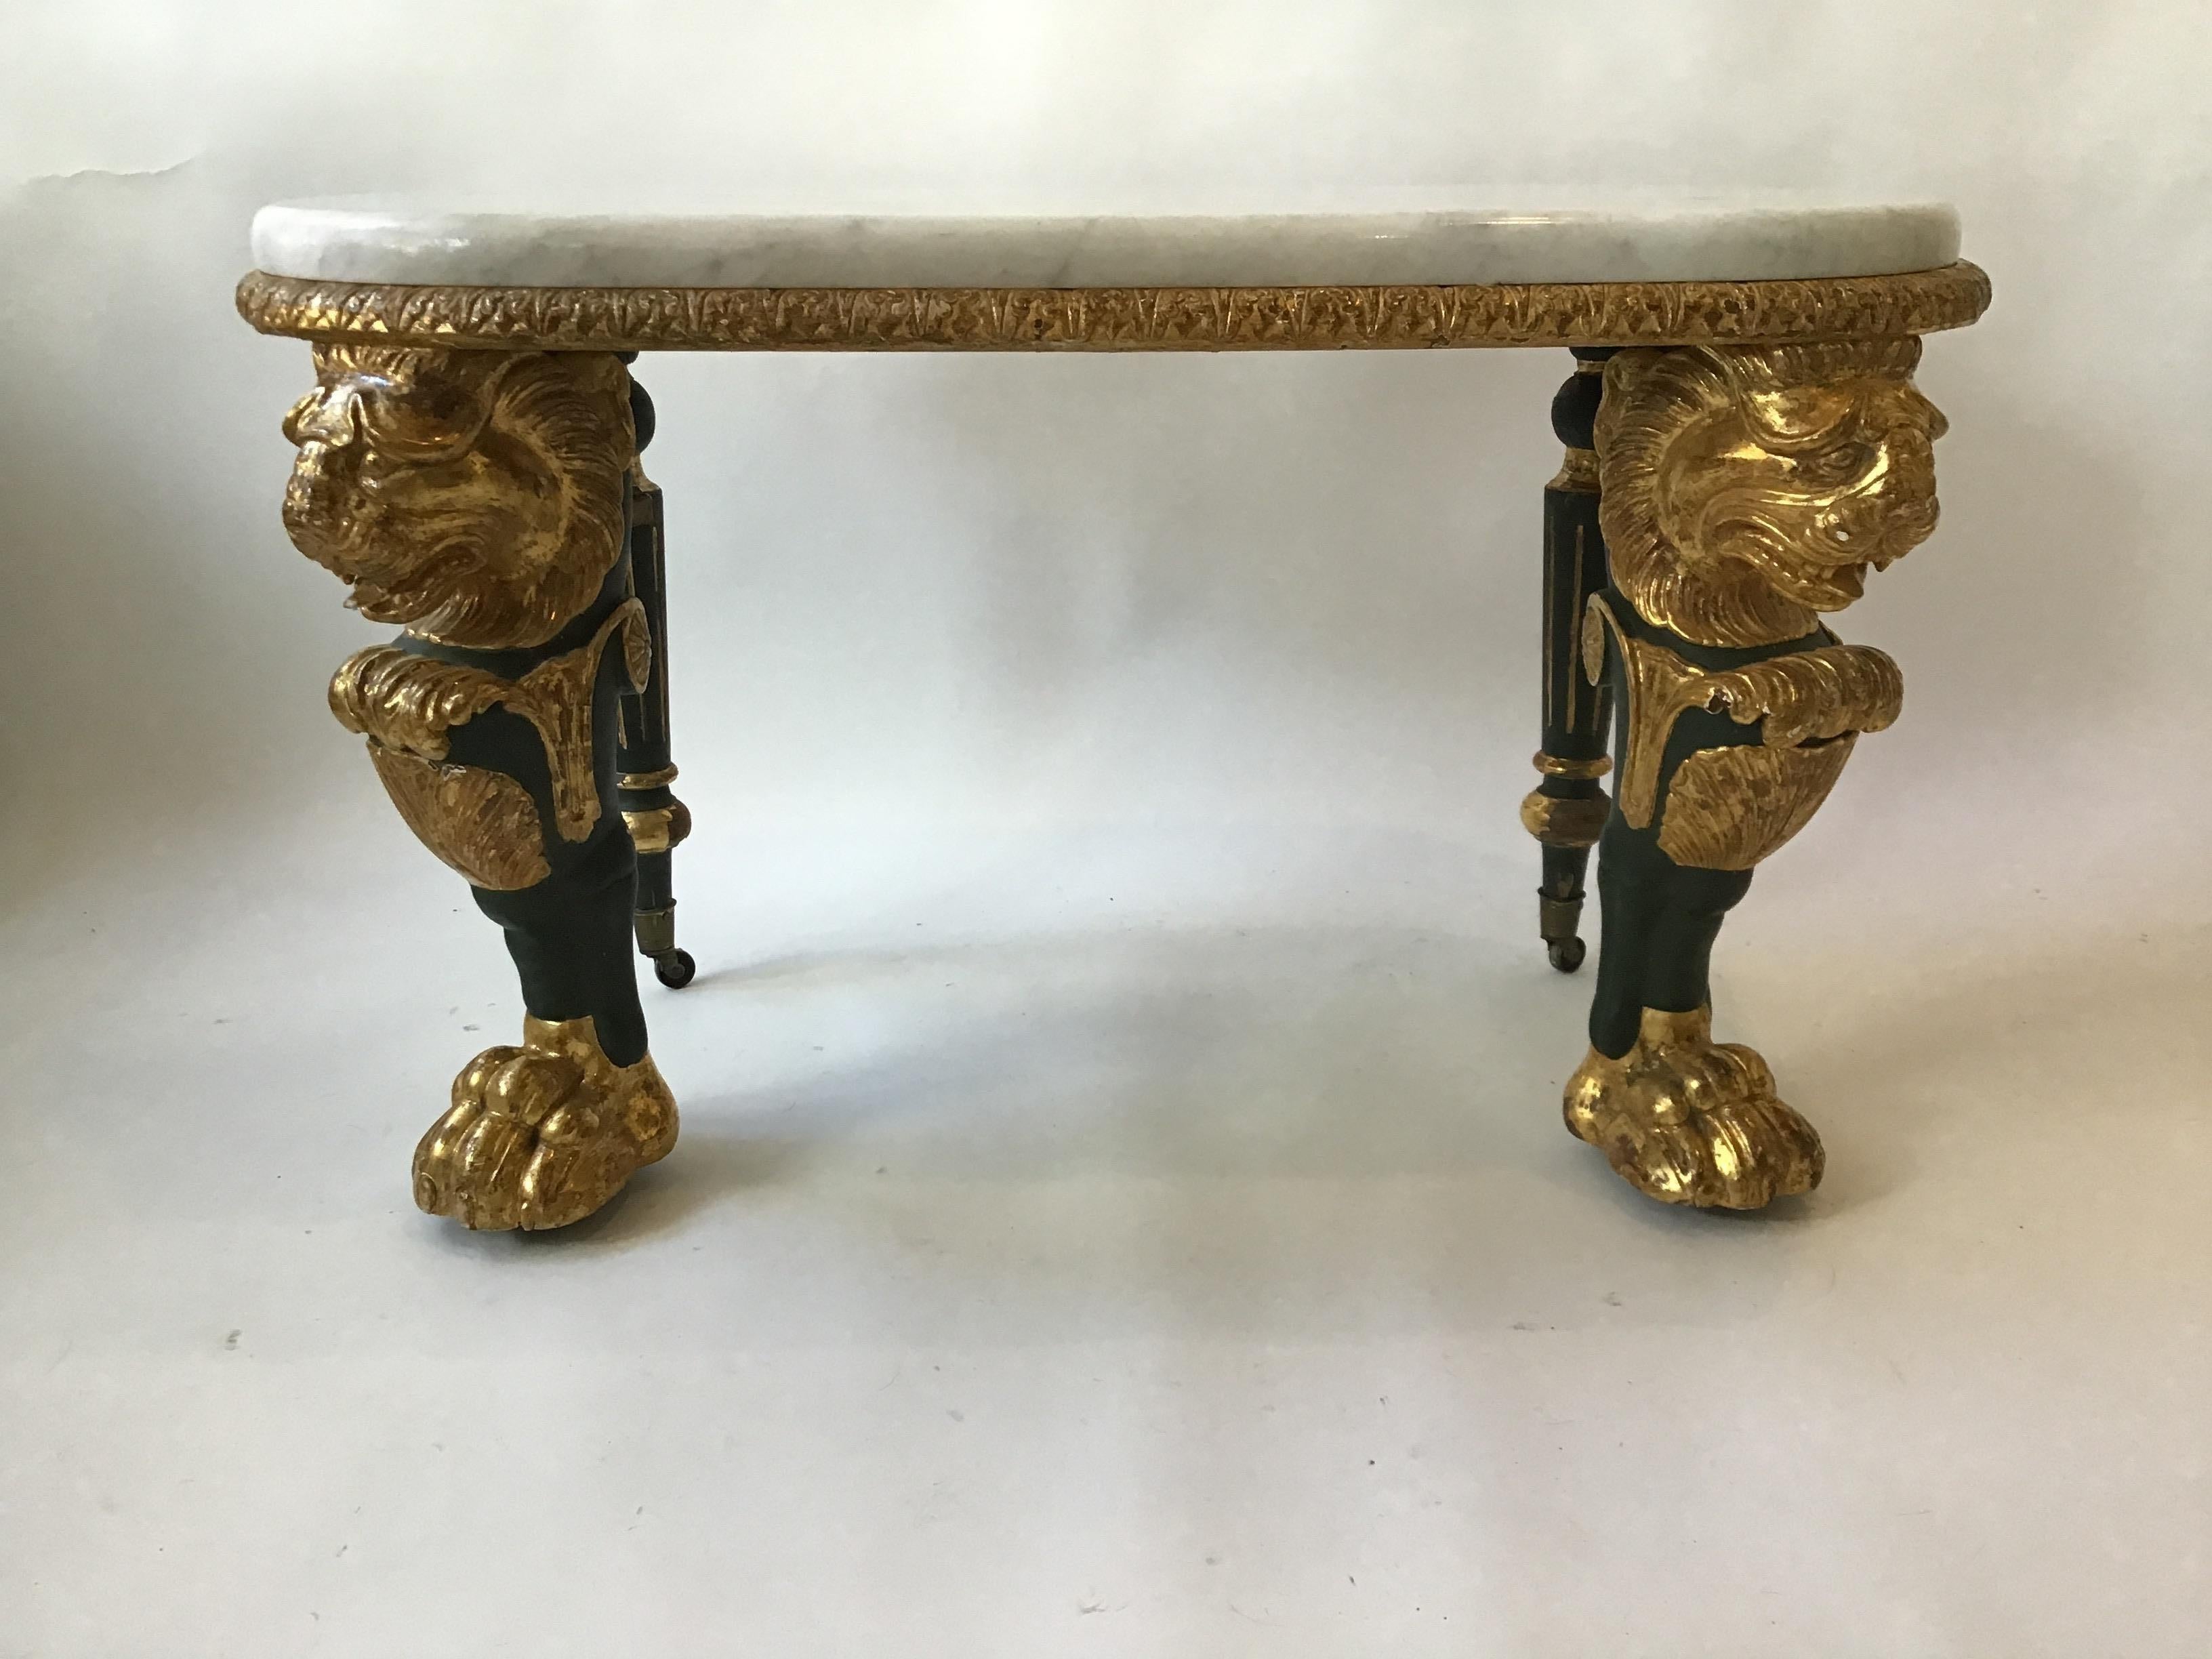 1880s French Gilt Lion Table with Marble Top In Good Condition For Sale In Tarrytown, NY